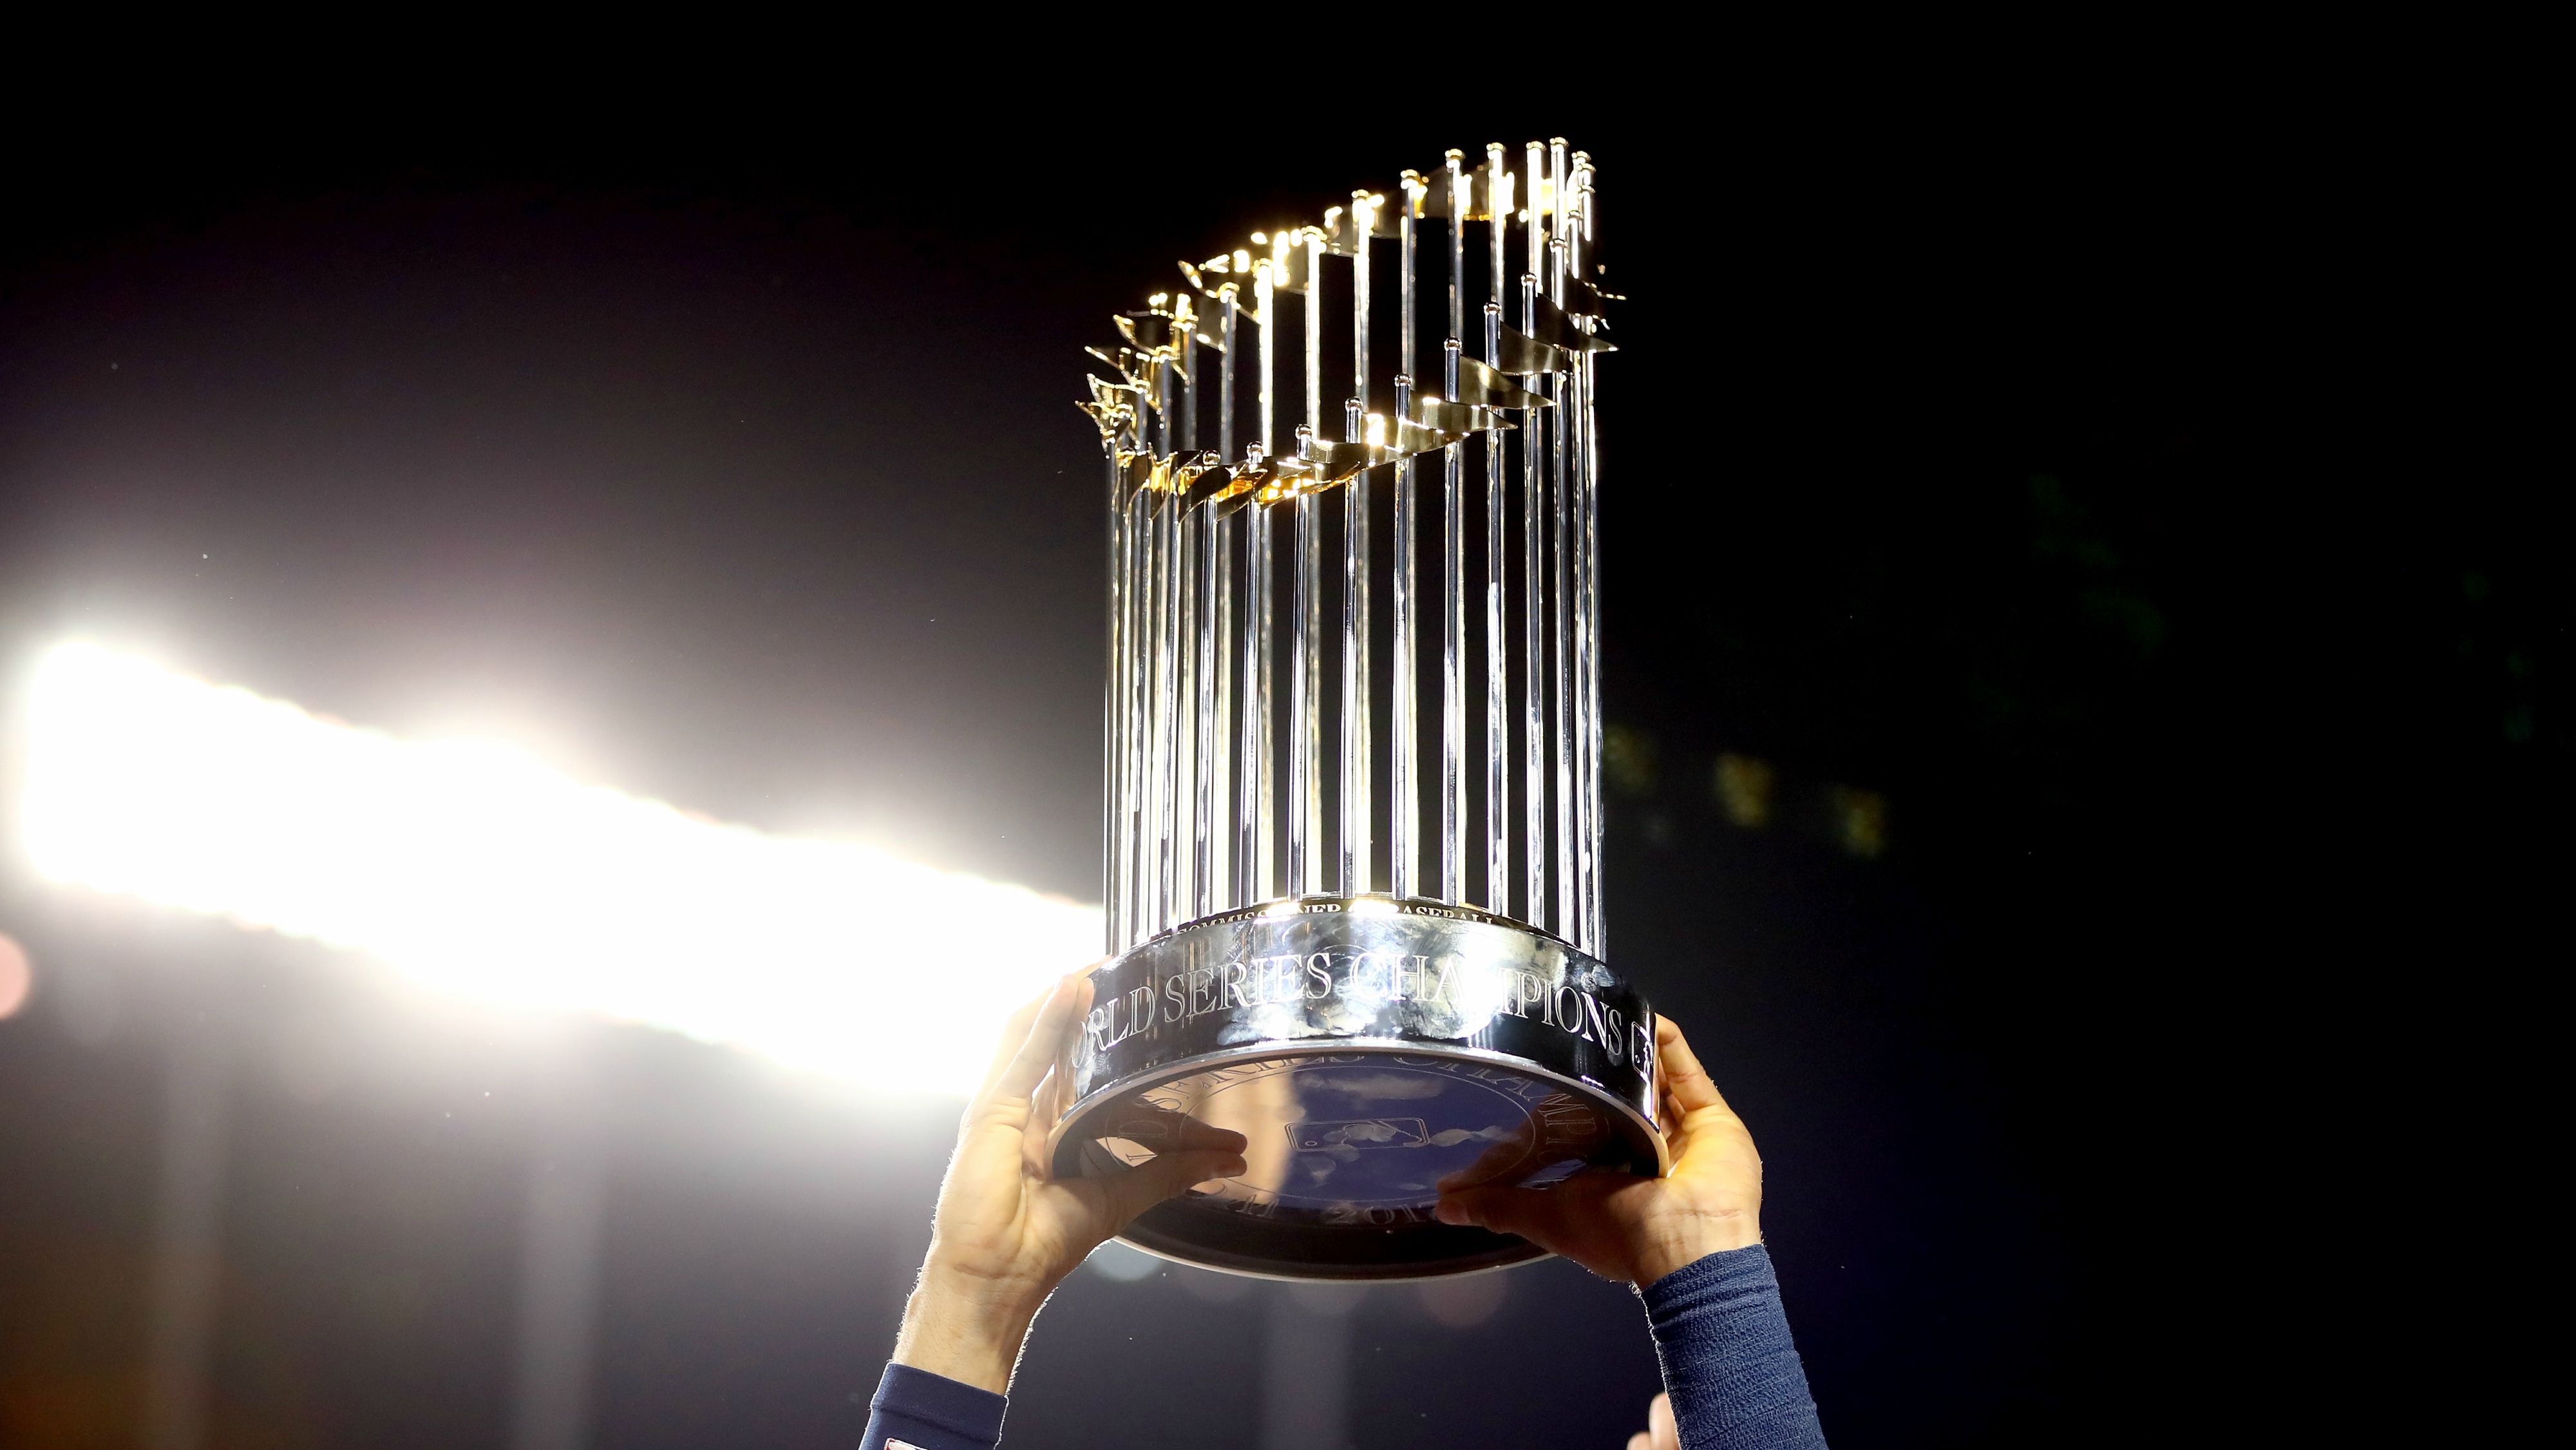 Astros World Series trophy tour: Where, when fans can see it